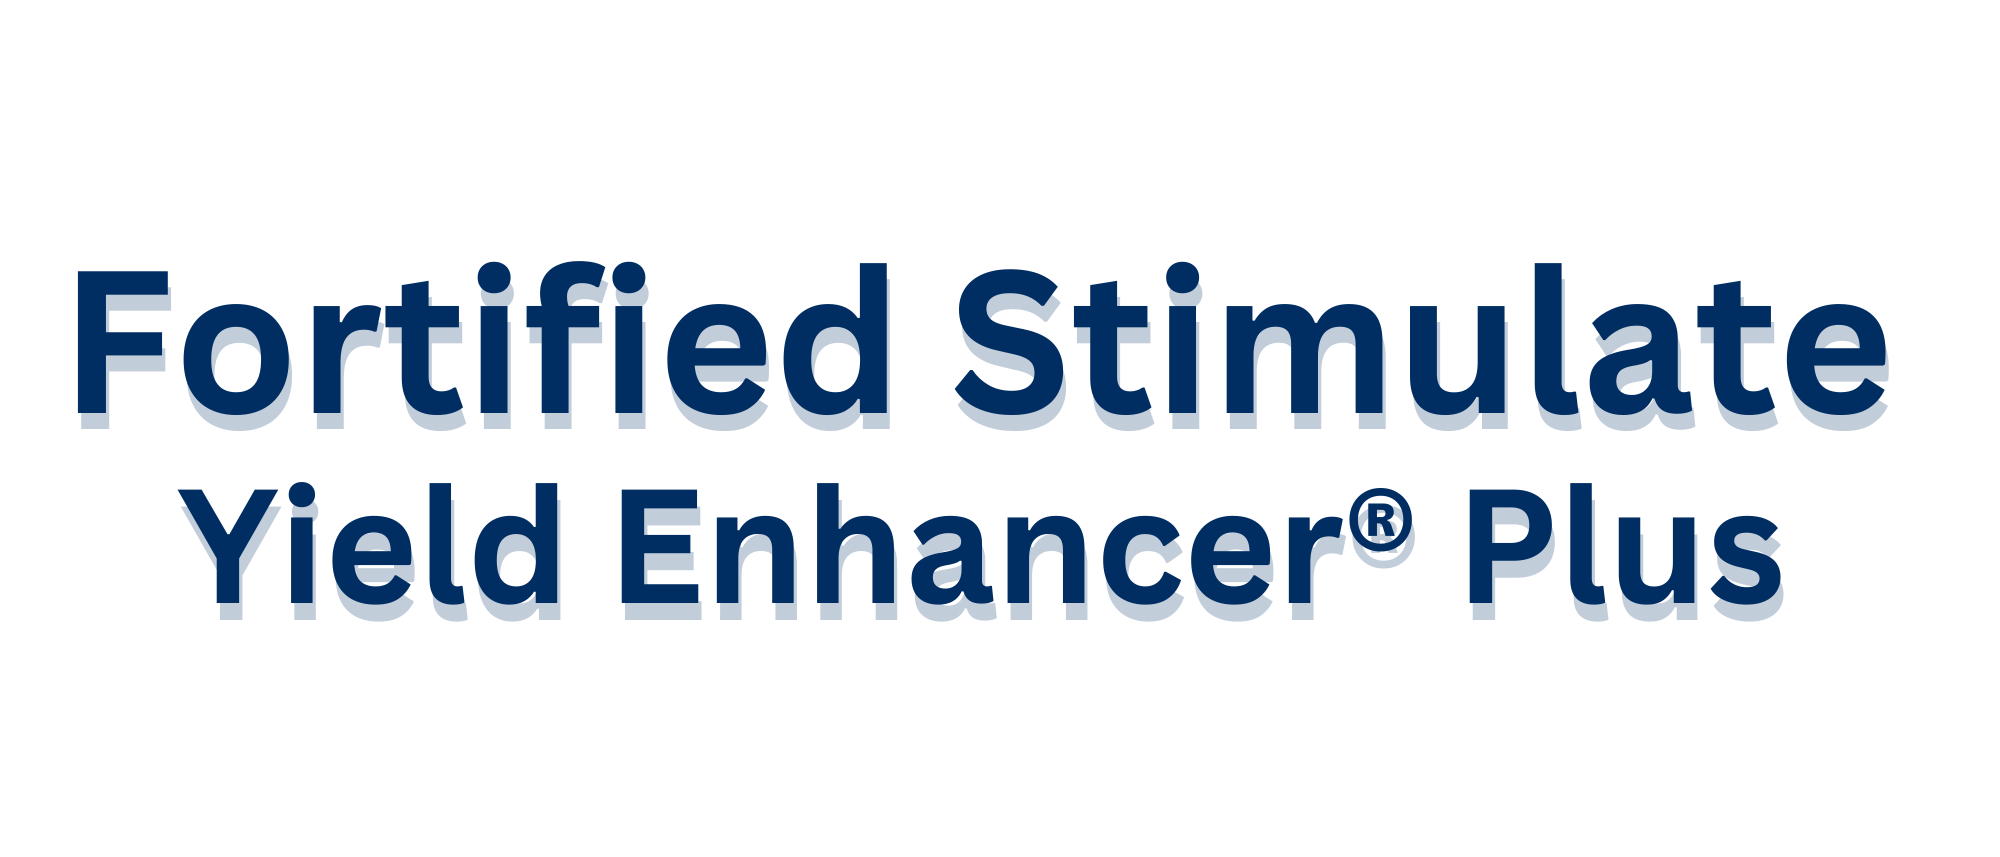 Fortified Stimulate Yield Enhancer Plus - Blue